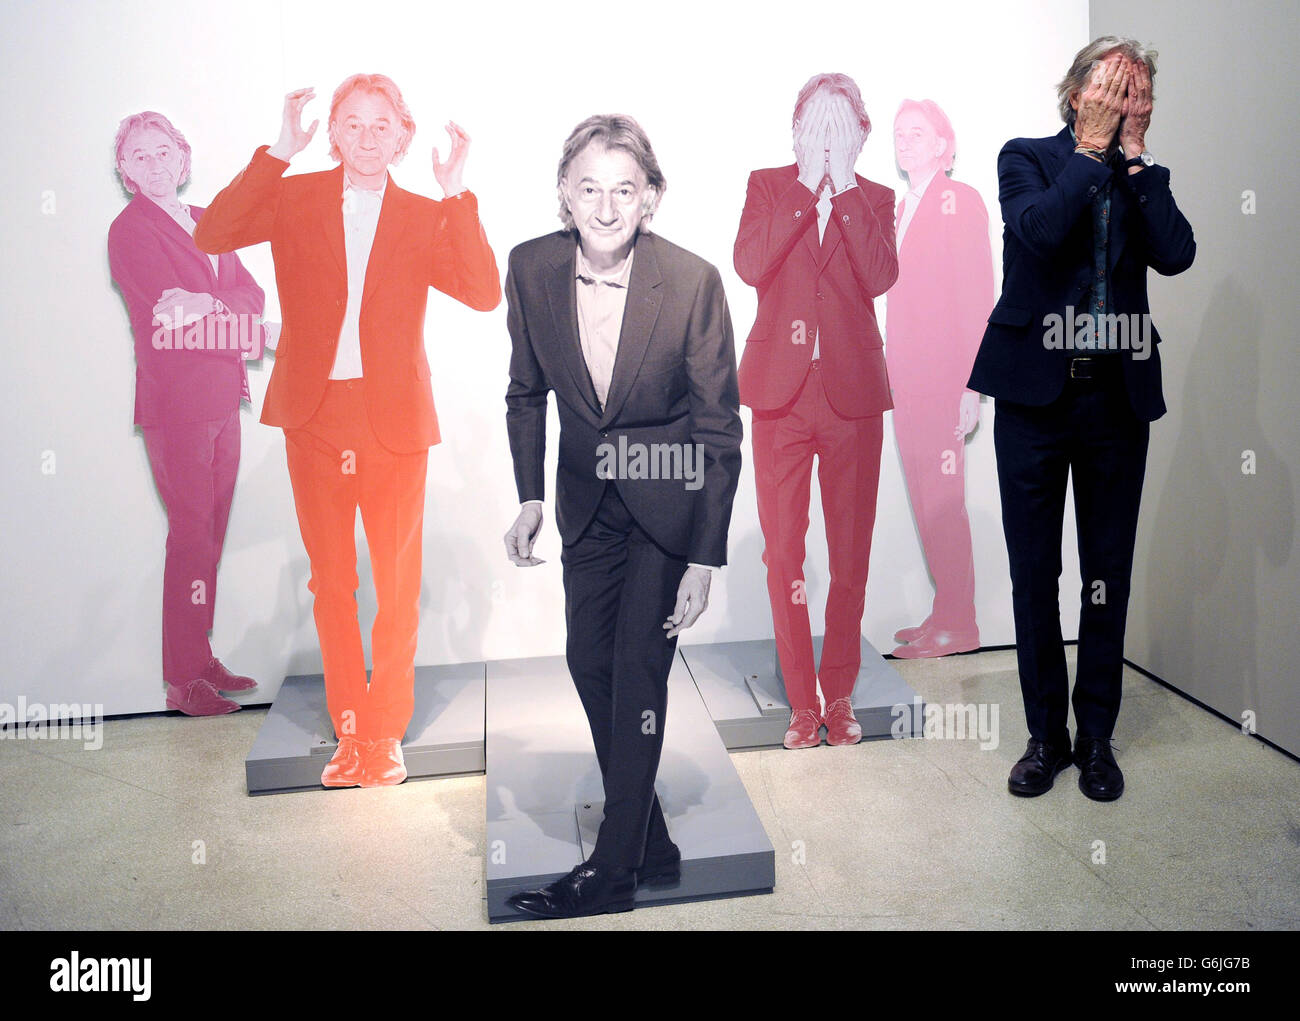 Fashion Designer Paul Smith poses for photographs at the opening of his new exhibition 'Hello, My Name is Paul Smith' at the Design Museum, London. The exhibition features hundreds of objects from the designers personal archive, including photographs, objects and many of his clothing designs from throughout his career. Stock Photo